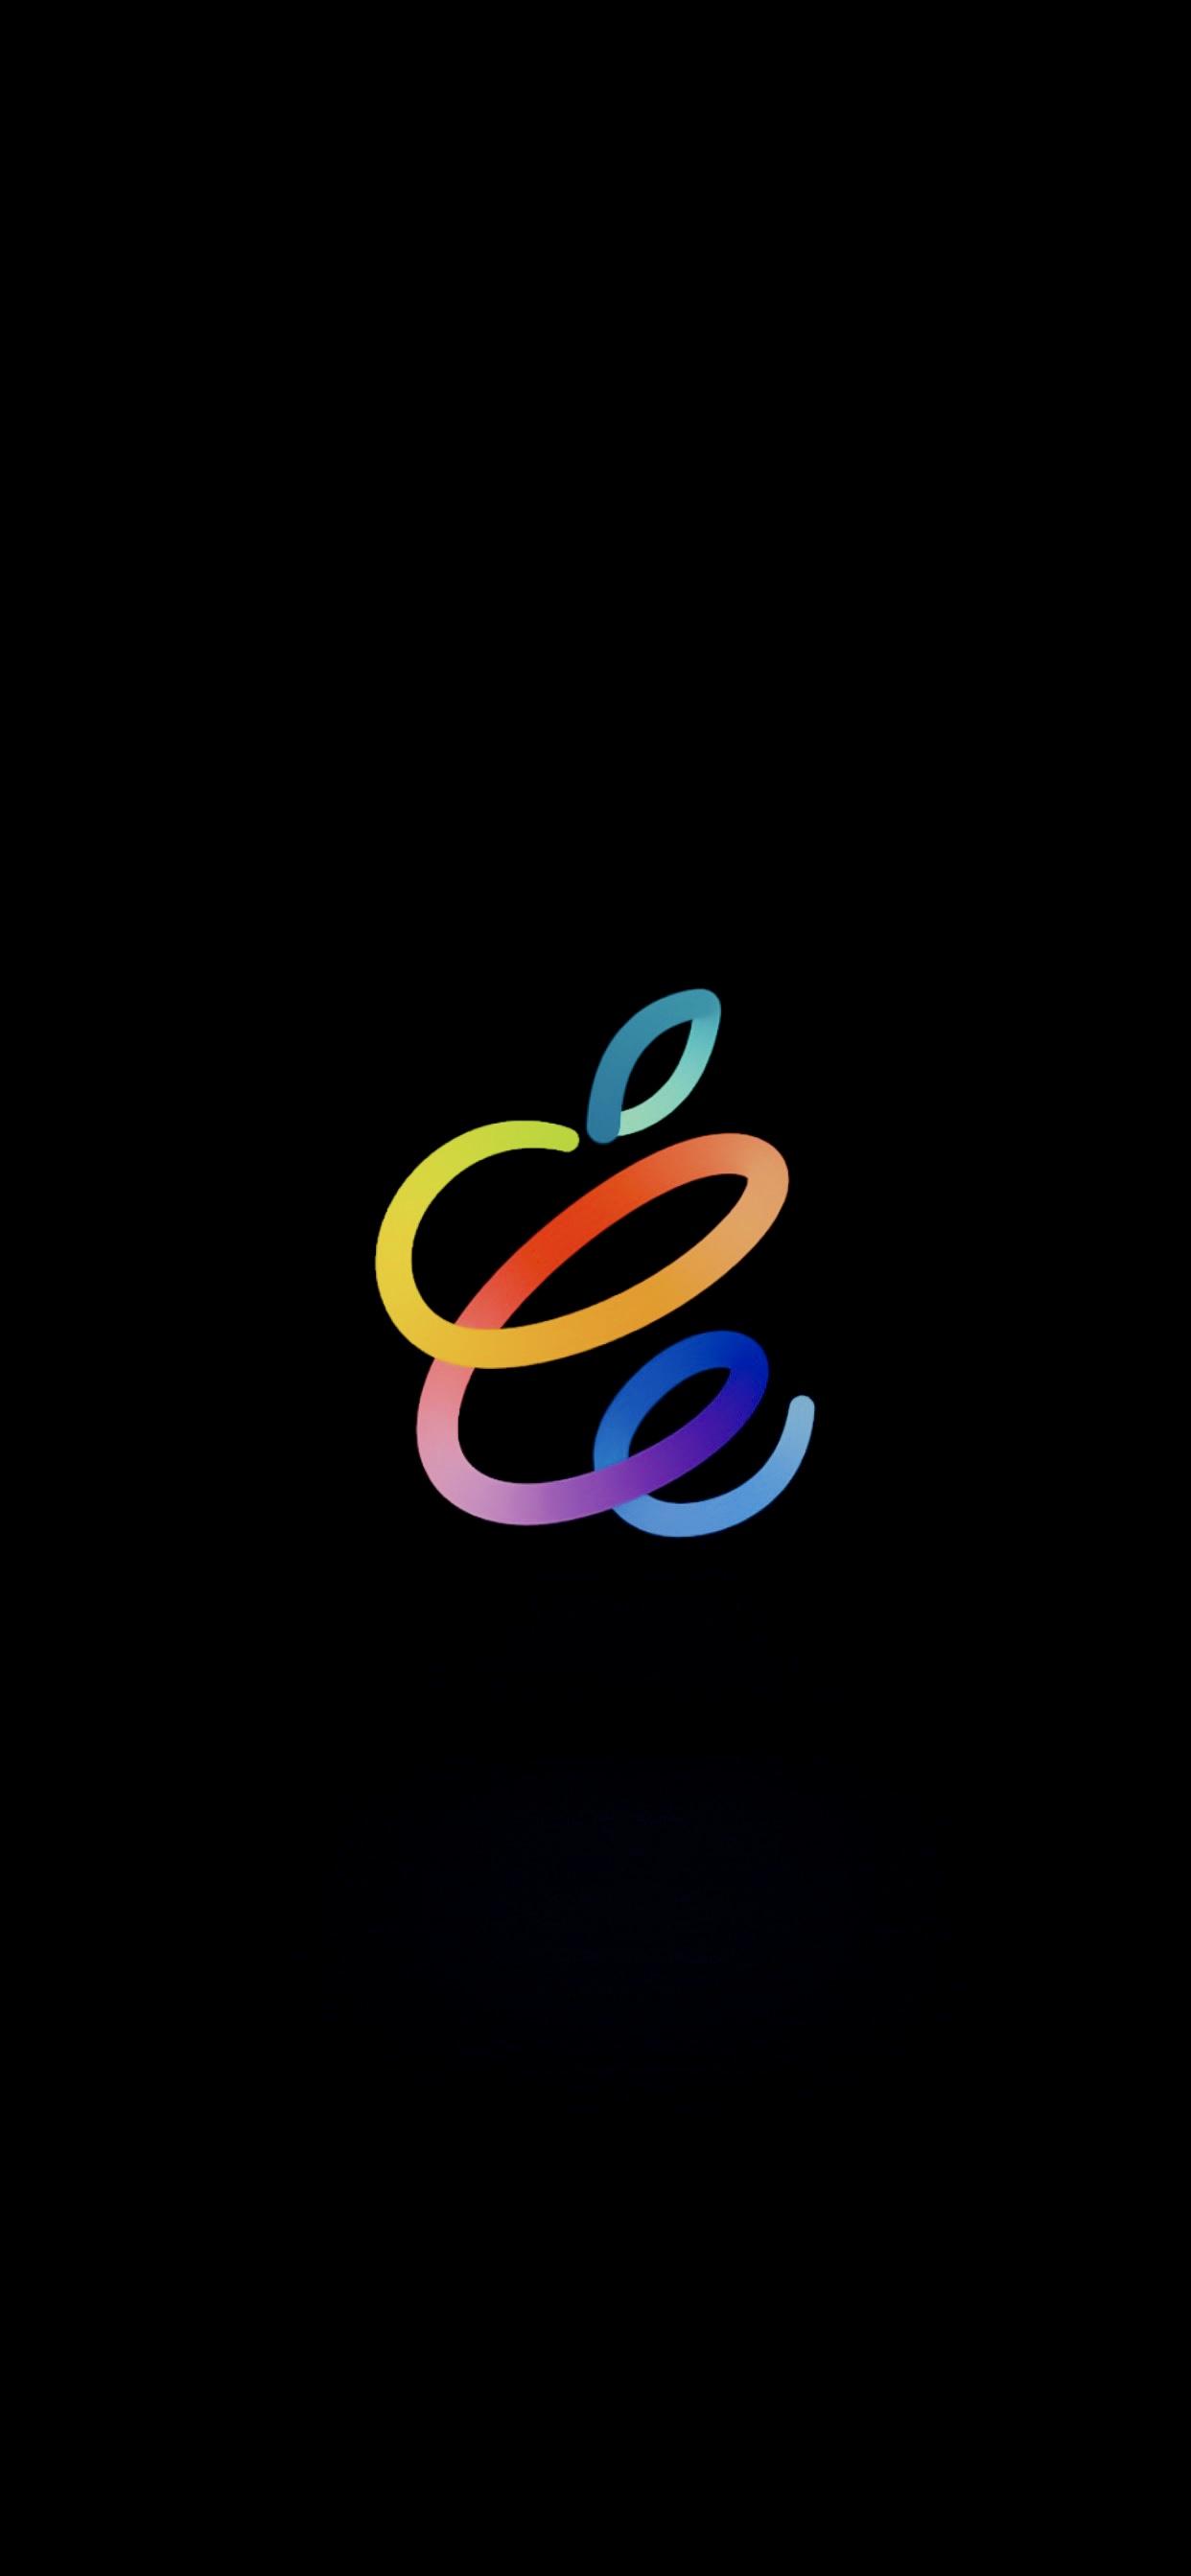 Apple Spring Loaded event wallpapers